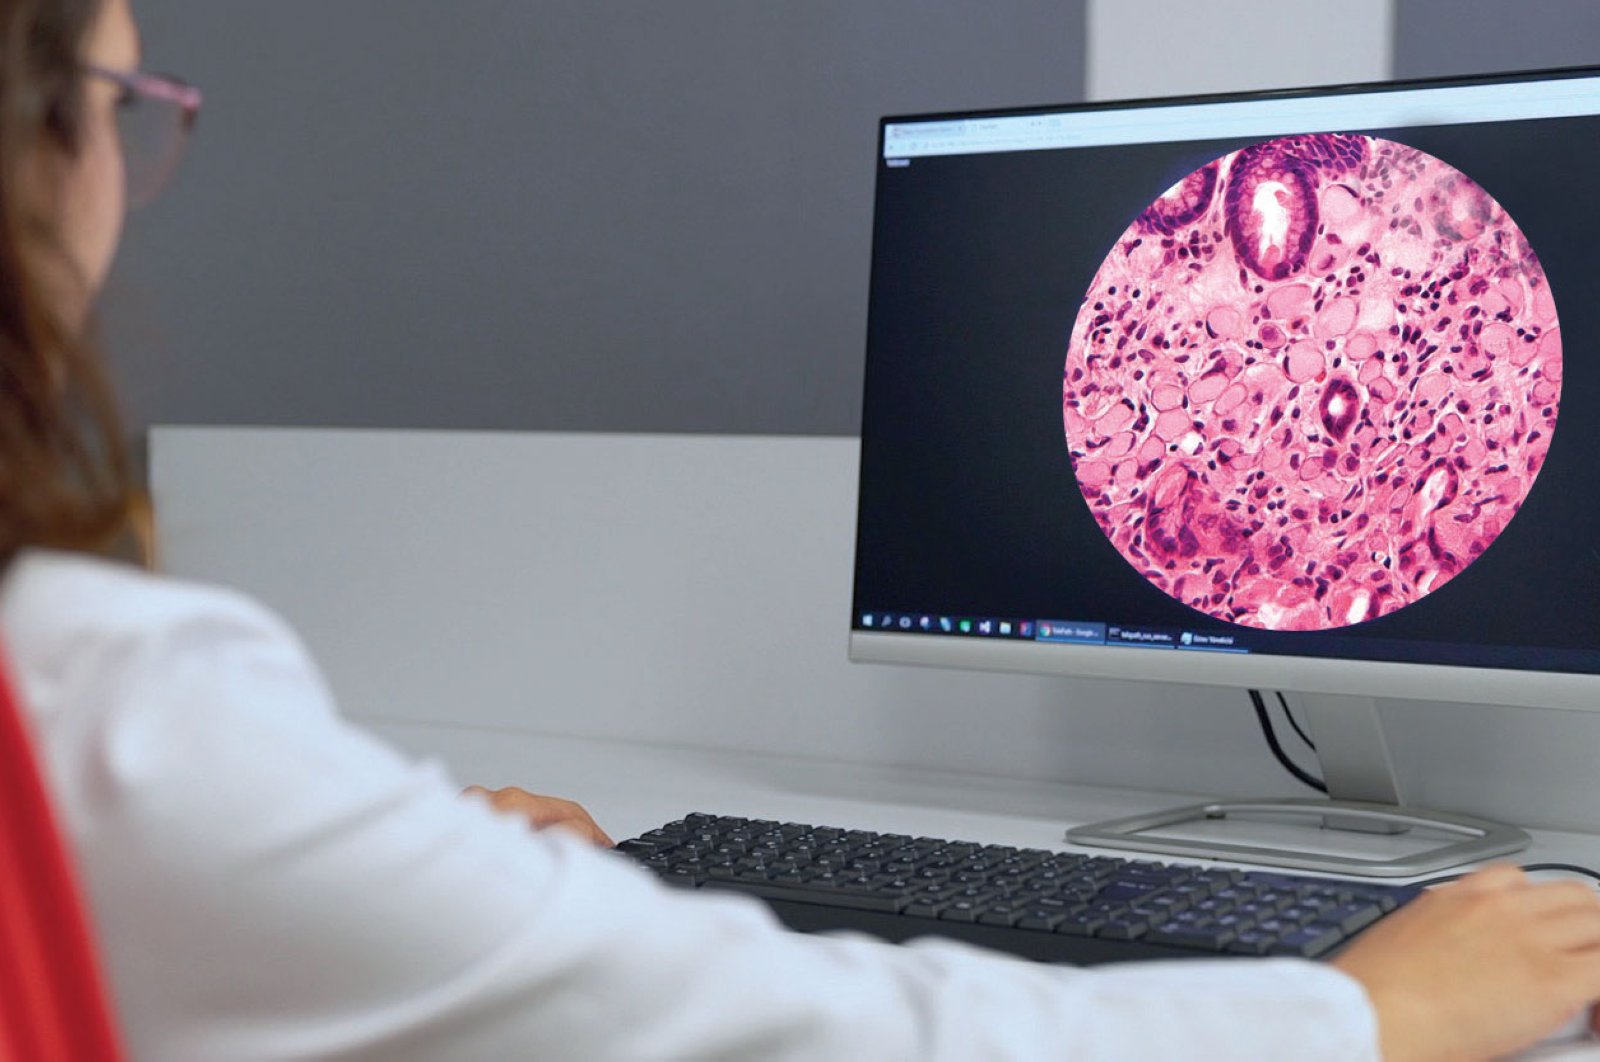 Founded in 2015, Virasoft's digital pathology solution has already been used in many private and public hospitals.